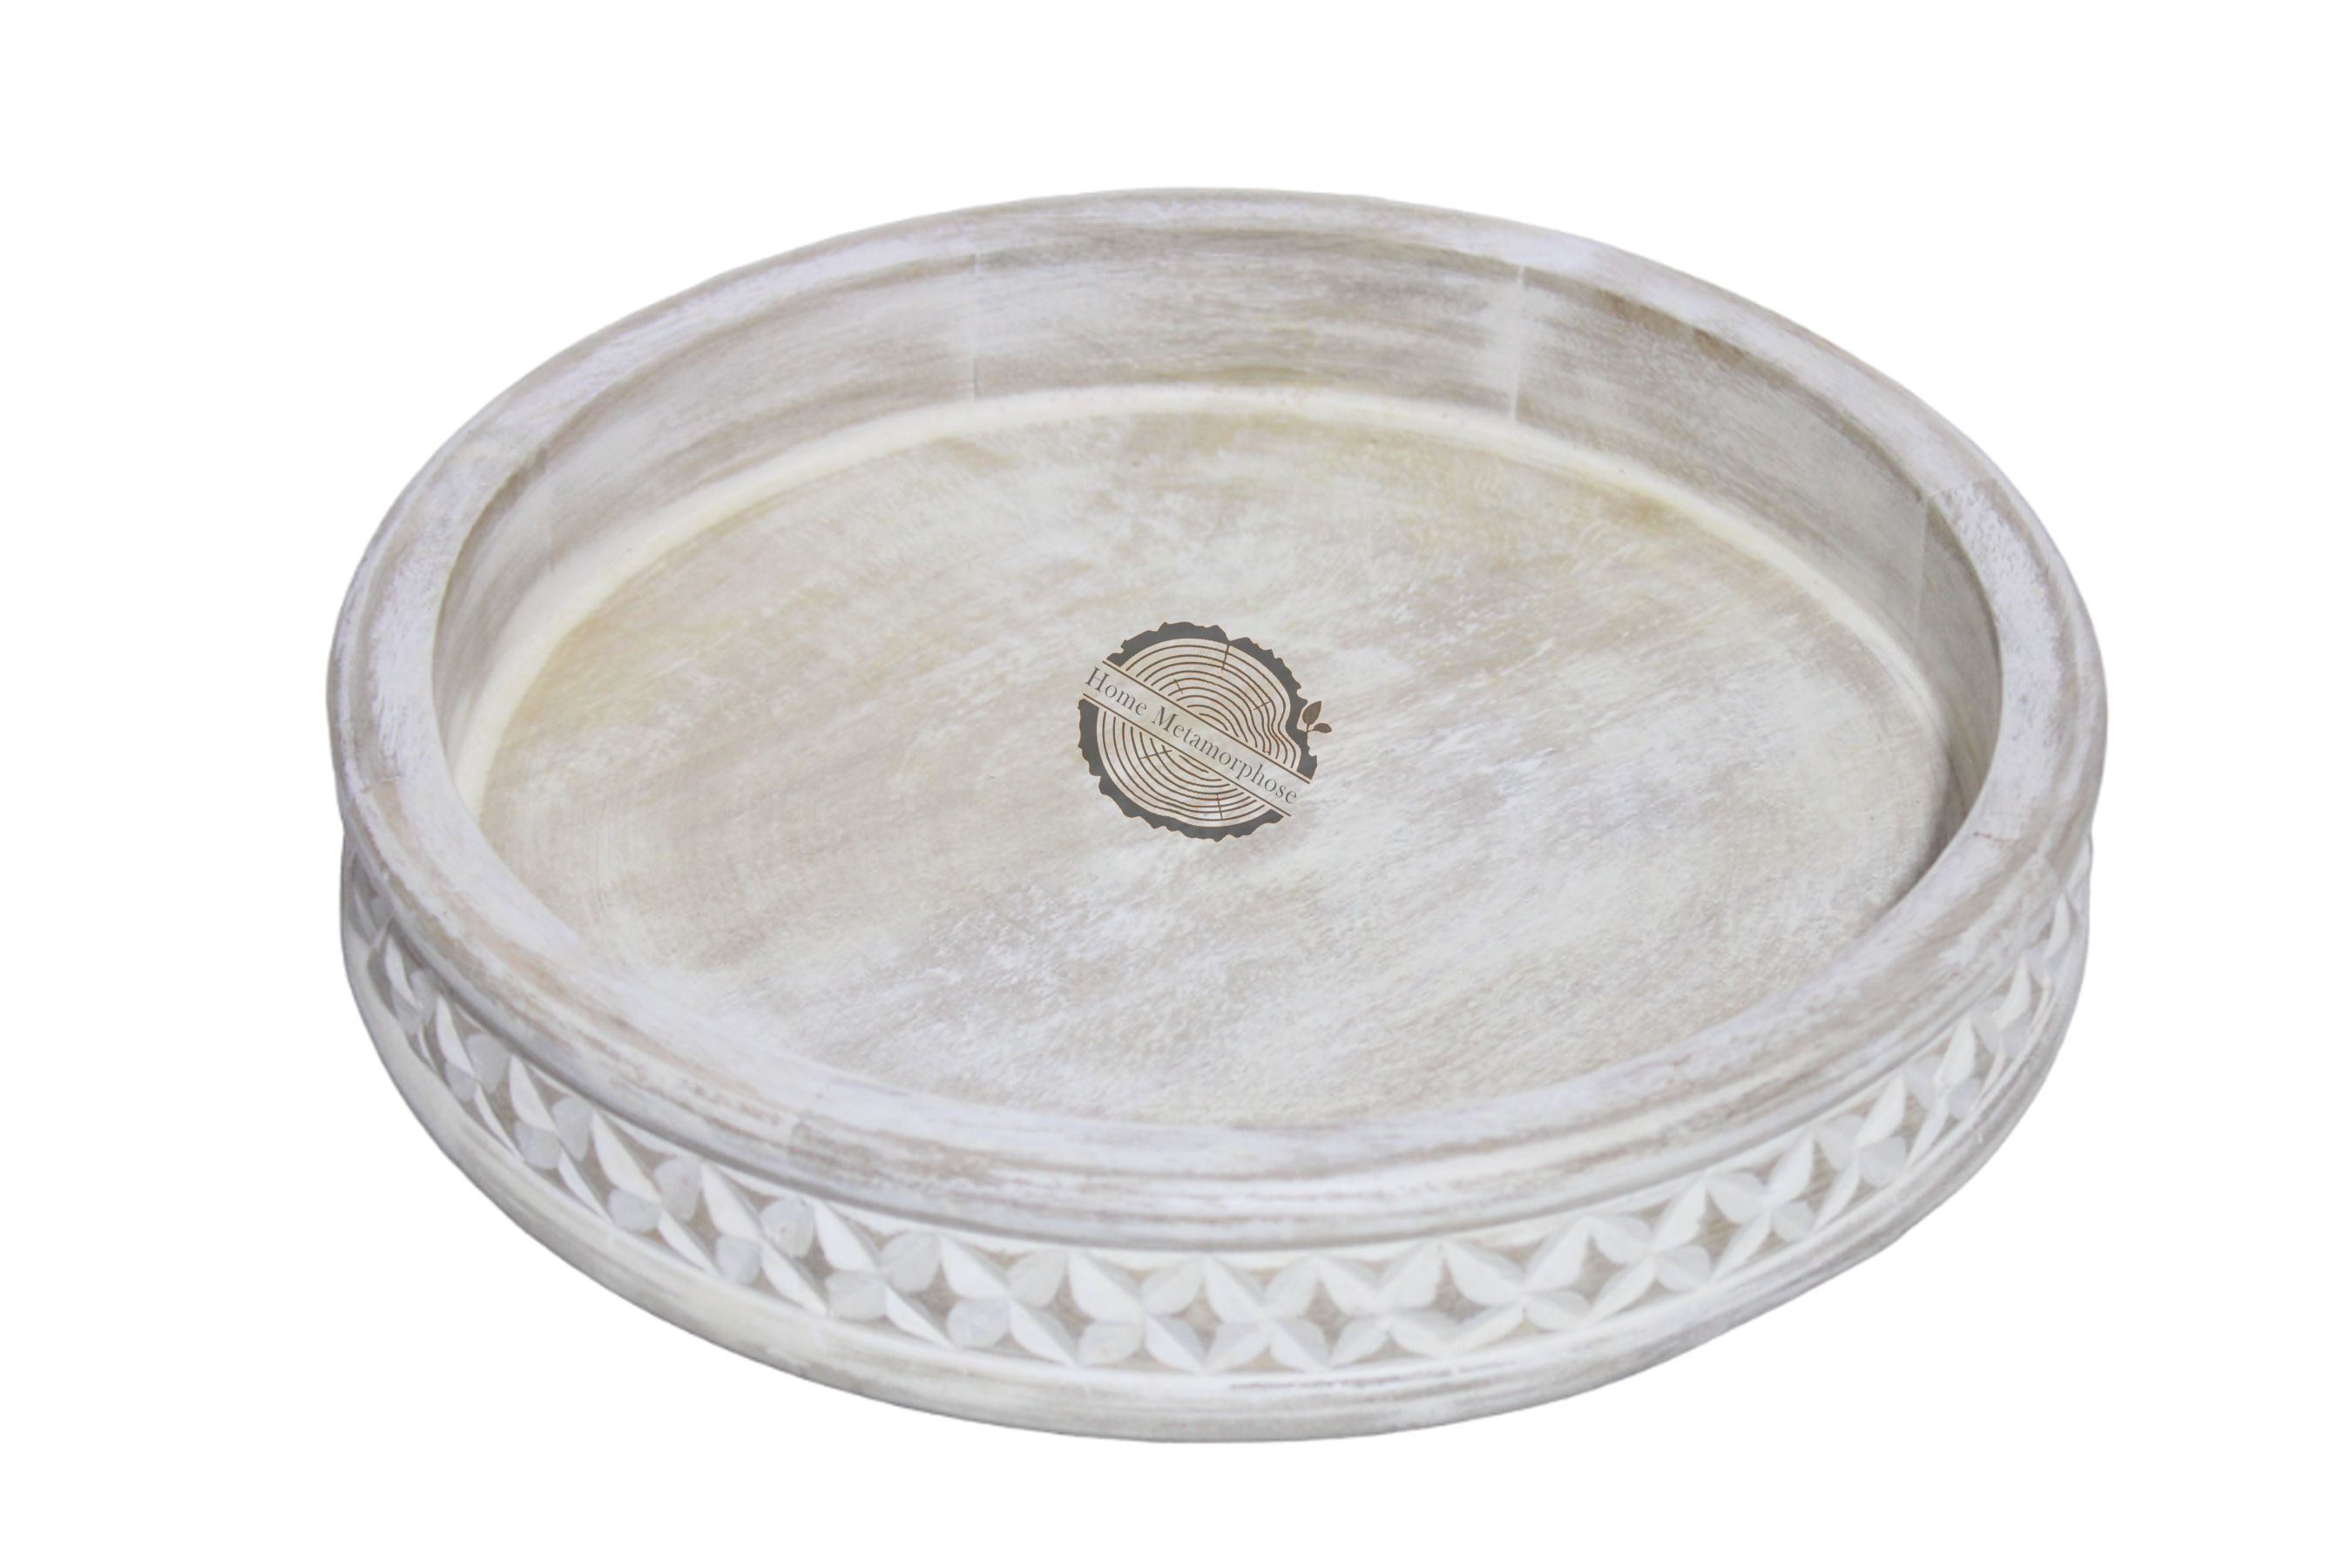 Wooden Round Diamond Cut Tray,Decorative Farmhouse Style Distressed Whitewashed Wooden Tray,Whitewashed Round Decorative Wood Tray Round Wooden Tray